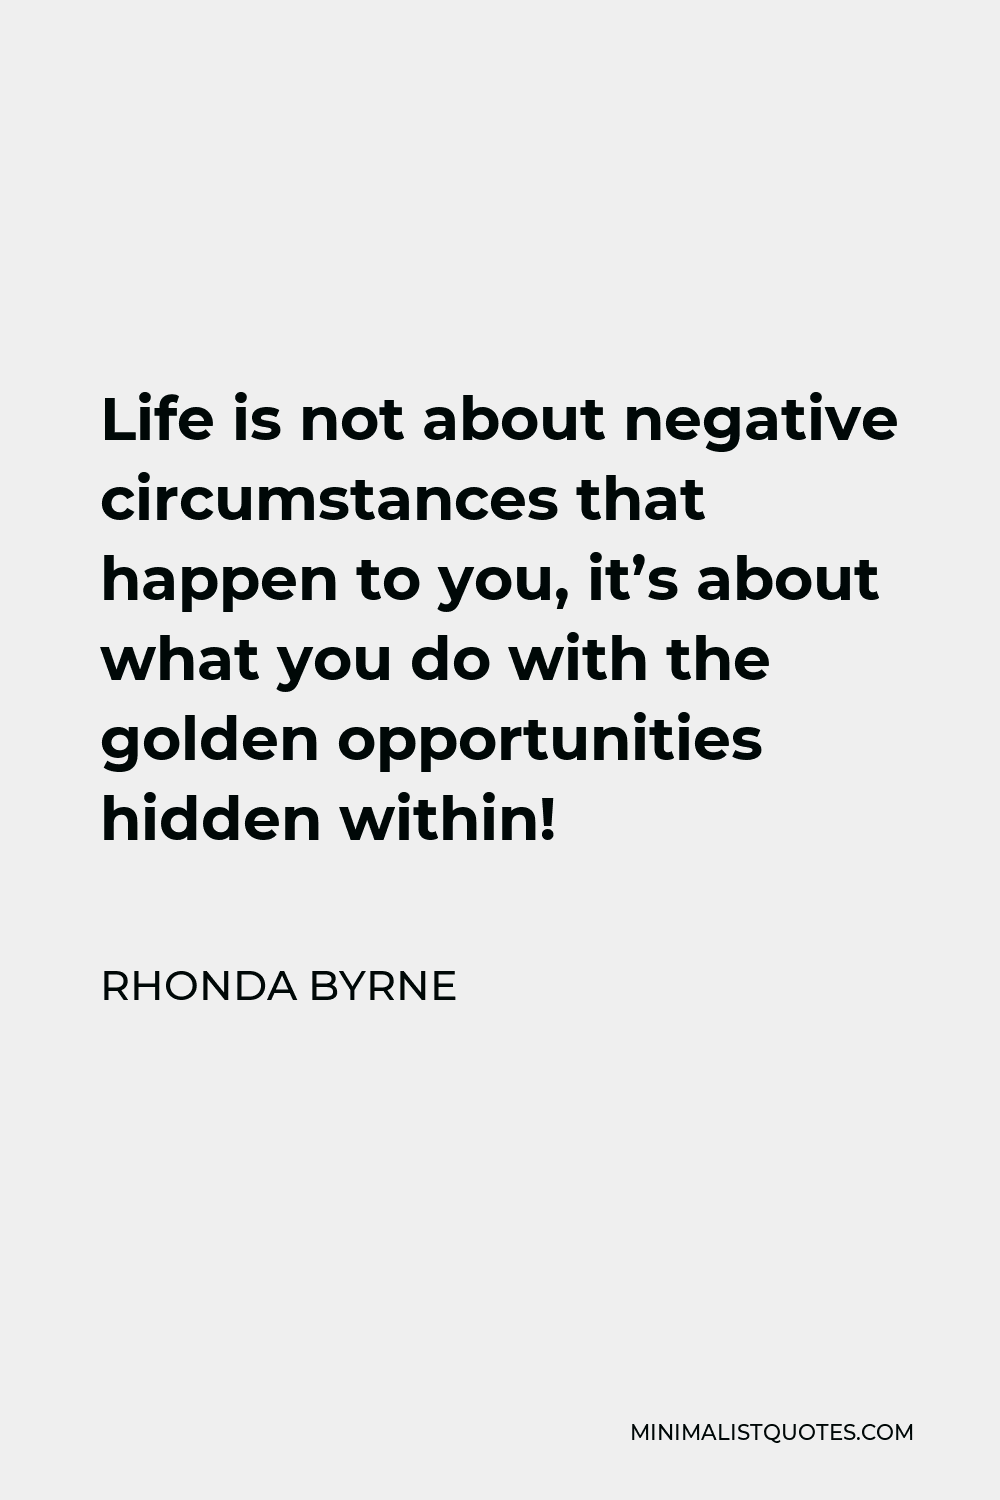 Rhonda Byrne Quote - Life is not about negative circumstances that happen to you, it’s about what you do with the golden opportunities hidden within!